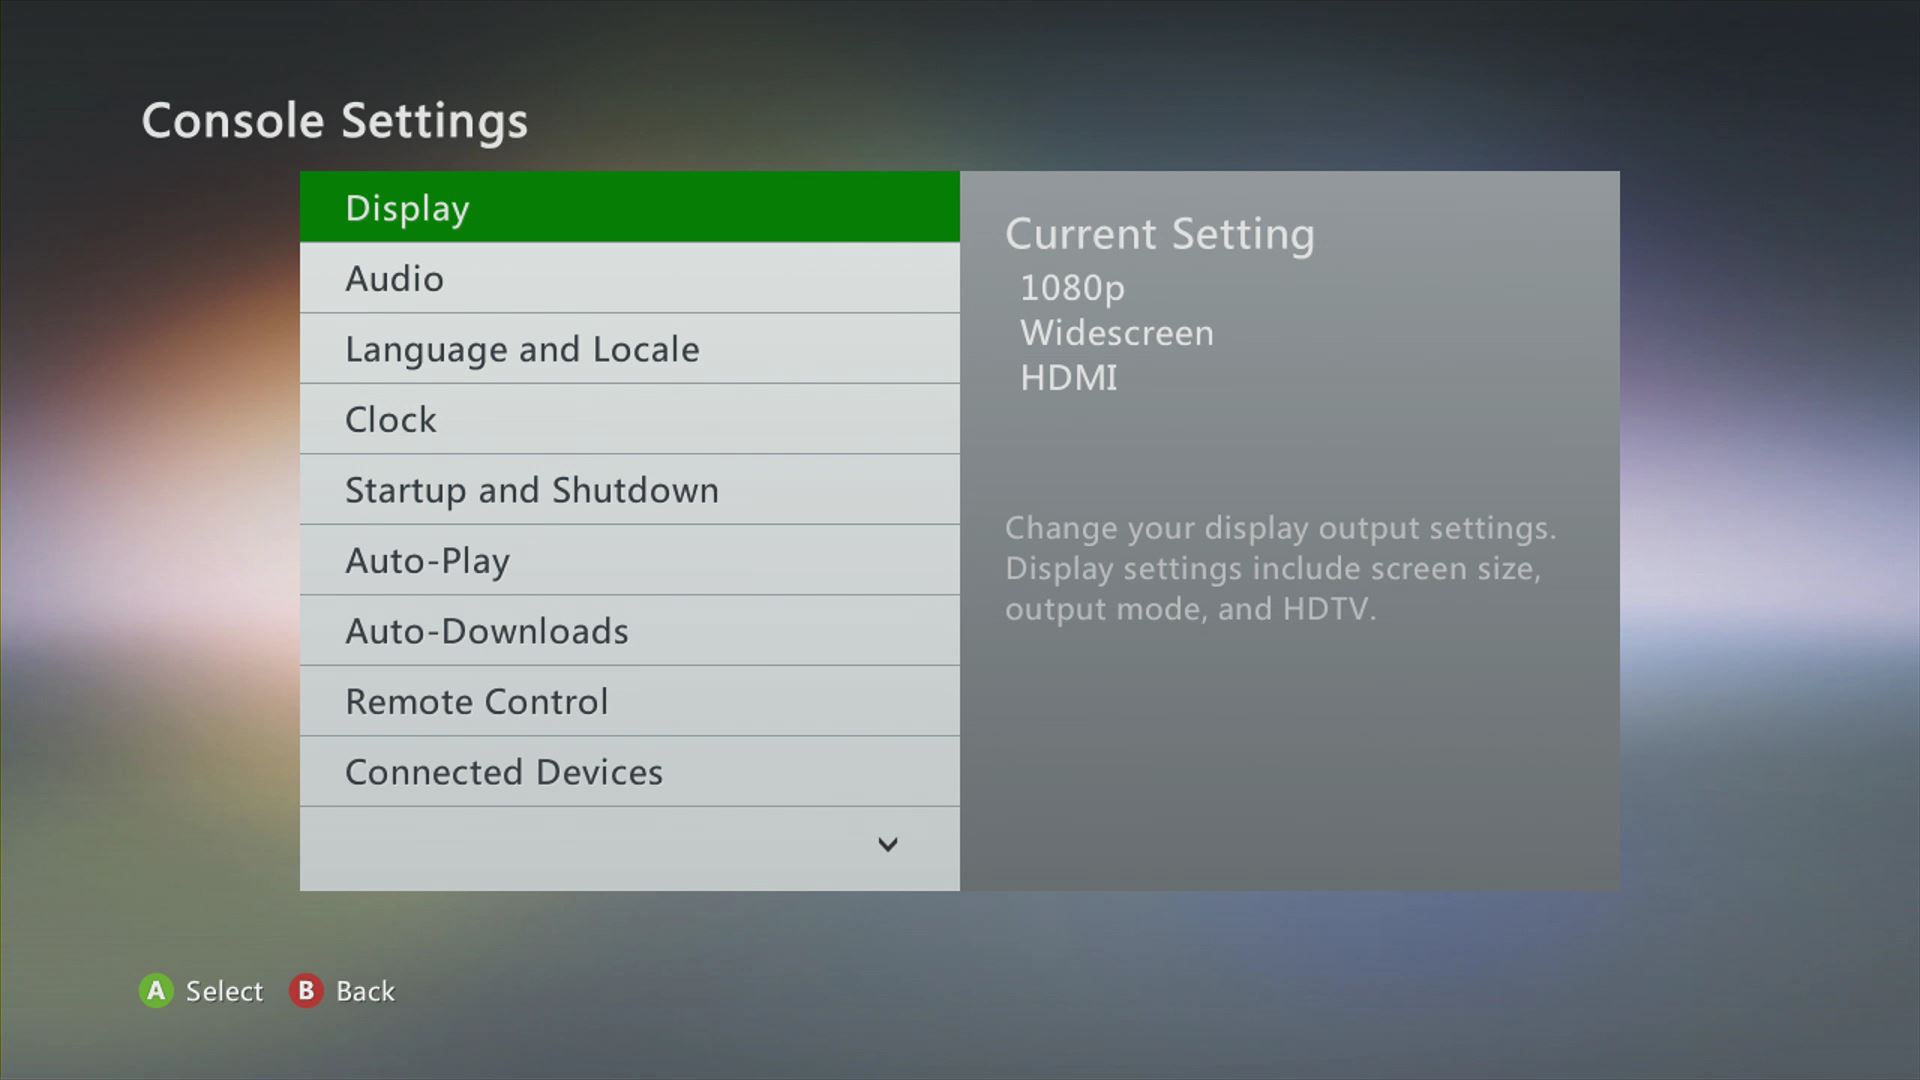 Will Xbox 360 Play MP4? Yes, and Here's How - VideoProc